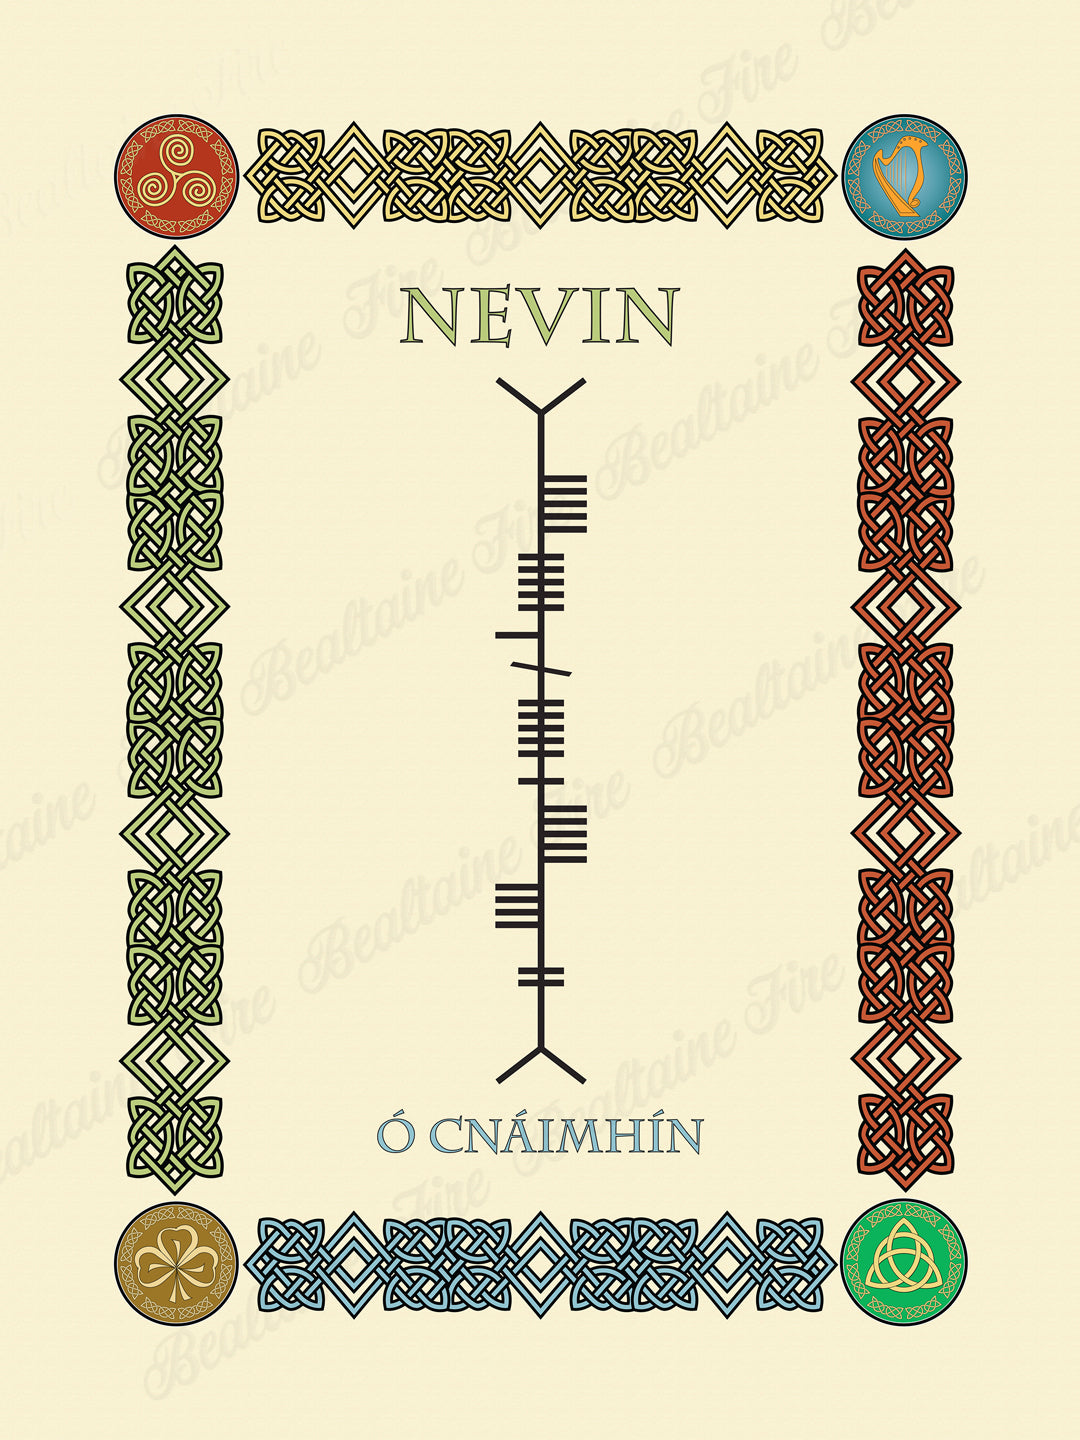 Nevin in Old Irish and Ogham - Premium luster unframed print